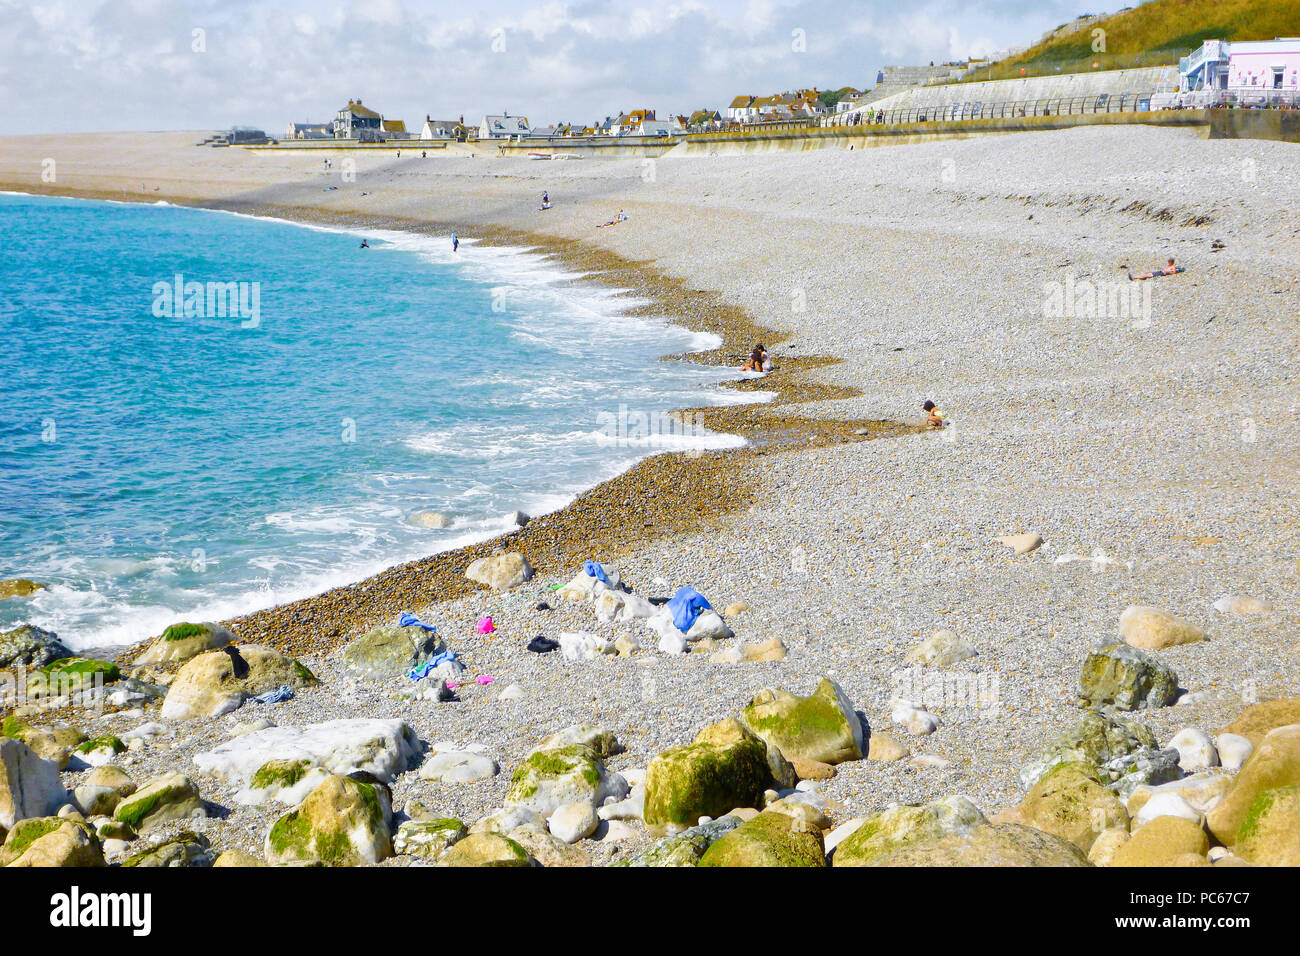 Chesil Beach. 31st July 2018. The vast sweep of Chesil Beach, Portland, on a hot and sunny day Credit: stuart fretwell/Alamy Live News Stock Photo